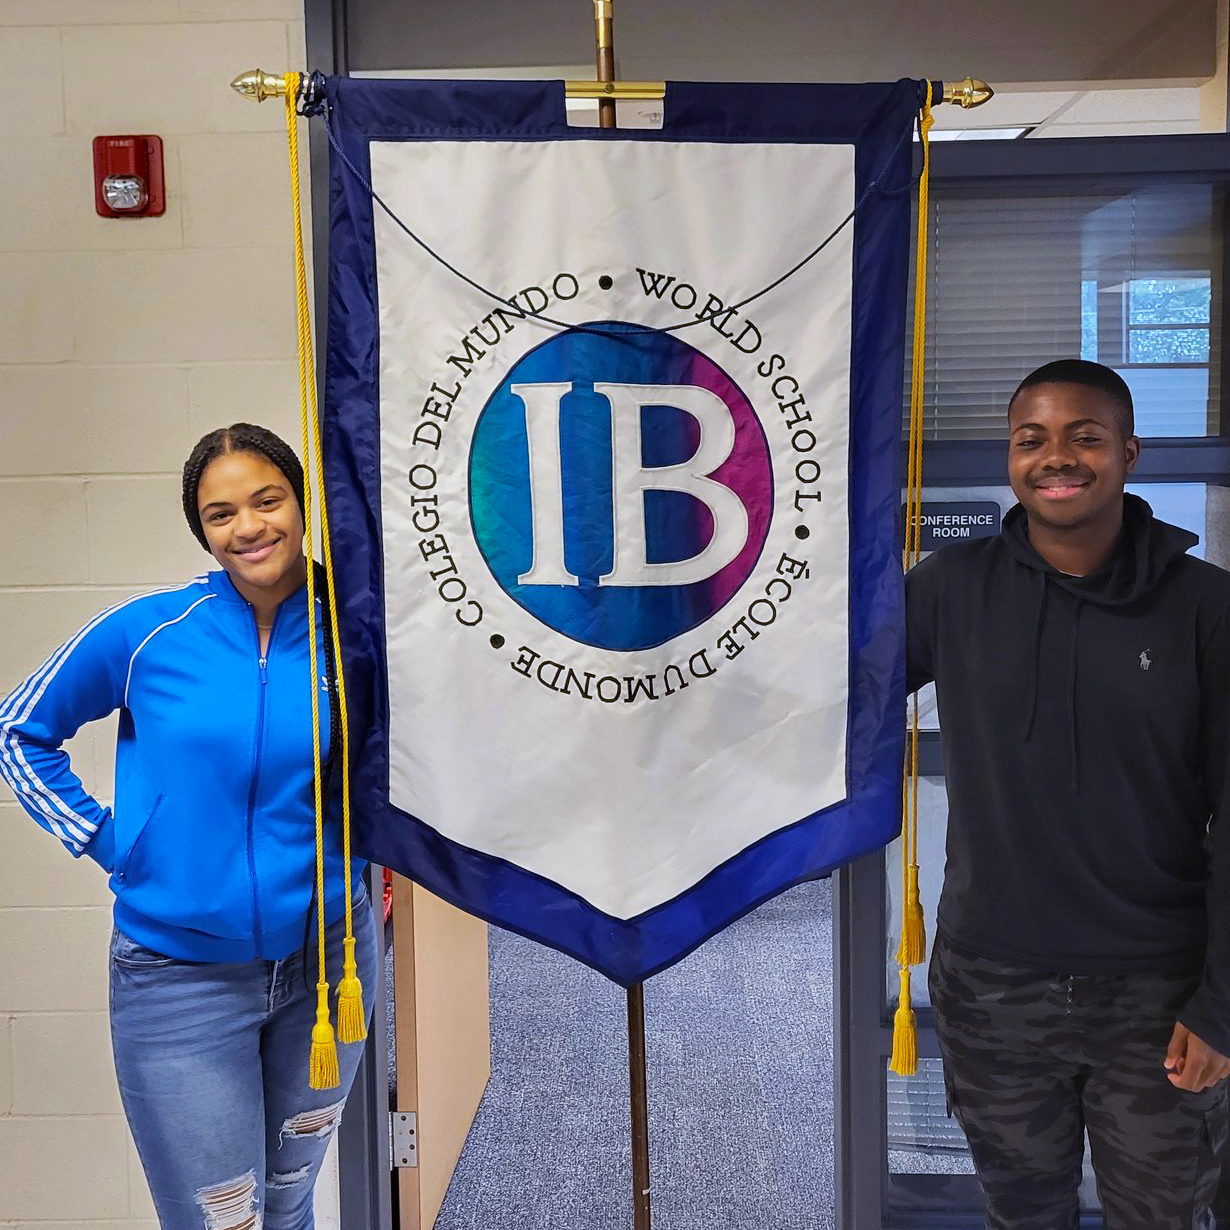 Two students standing next to an IB flag on a display stand